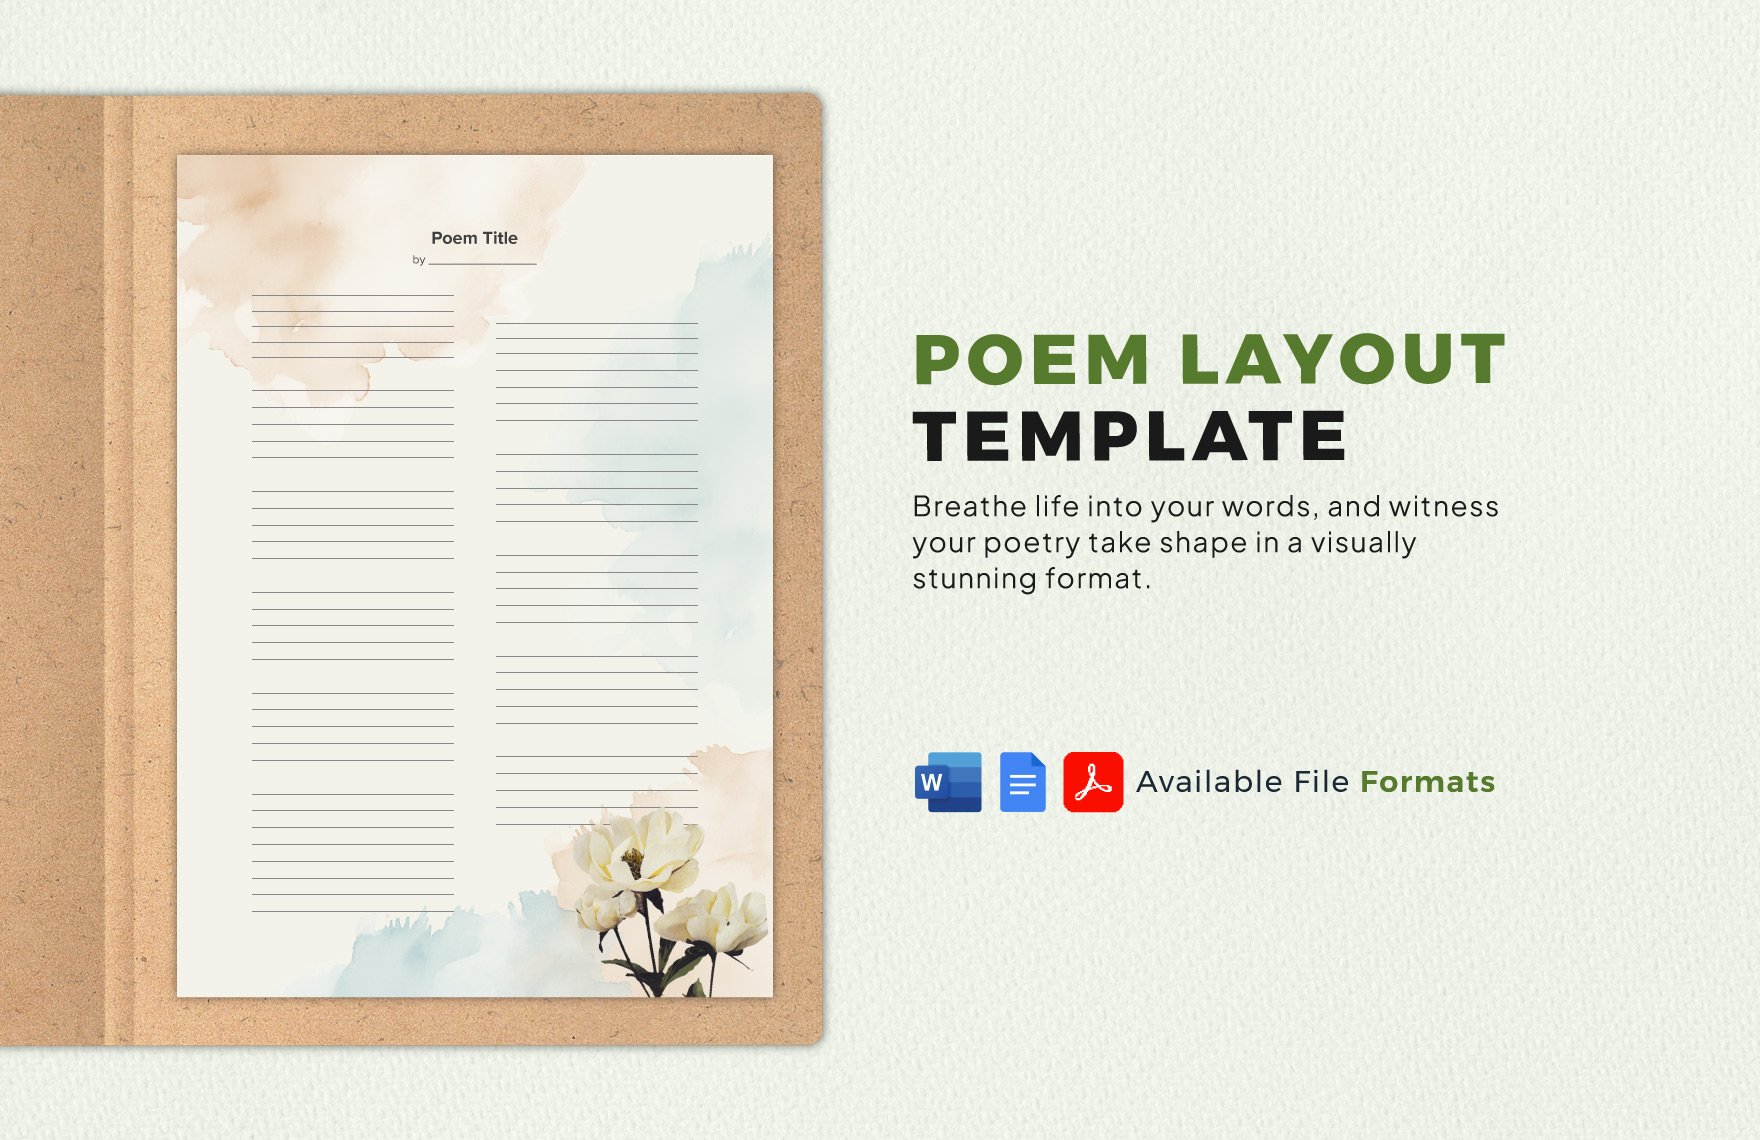 Poem Layout Template